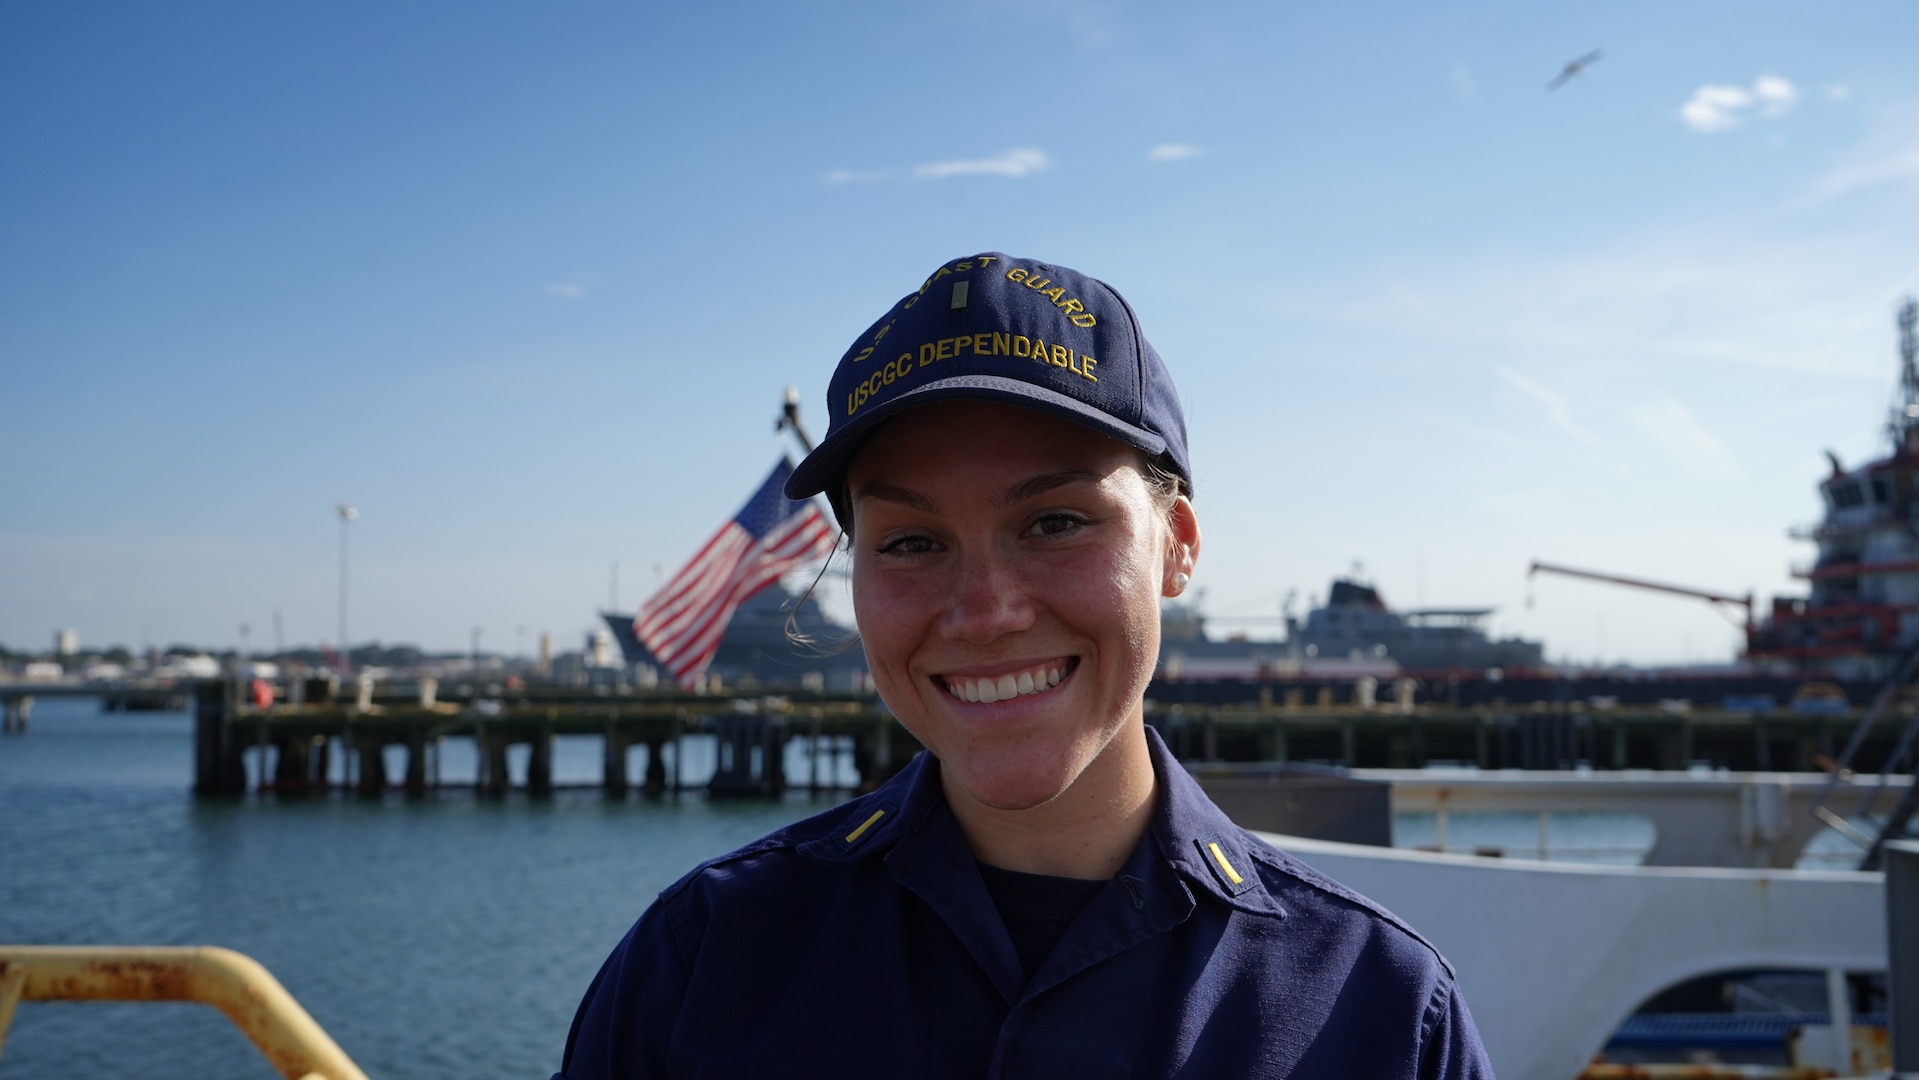 U.S. Coast Guard Ensign Hannah Jamison, assigned to USCGC Dependable (WMEC 626) poses for a photo at the cutter's return to home port in Virginia Beach, Virginia, Feb. 23, 2023, following a 50-day maritime safety and security patrol. Dependable's crew patrolled the Florida Straits and Windward Pass in support of Homeland Security Task Force - Southeast and Operation Vigilant Sentry in the Coast Guard Seventh District's area of responsibility. (U.S. Coast Guard photo by Petty Officer 3rd Class Kate Kilroy)